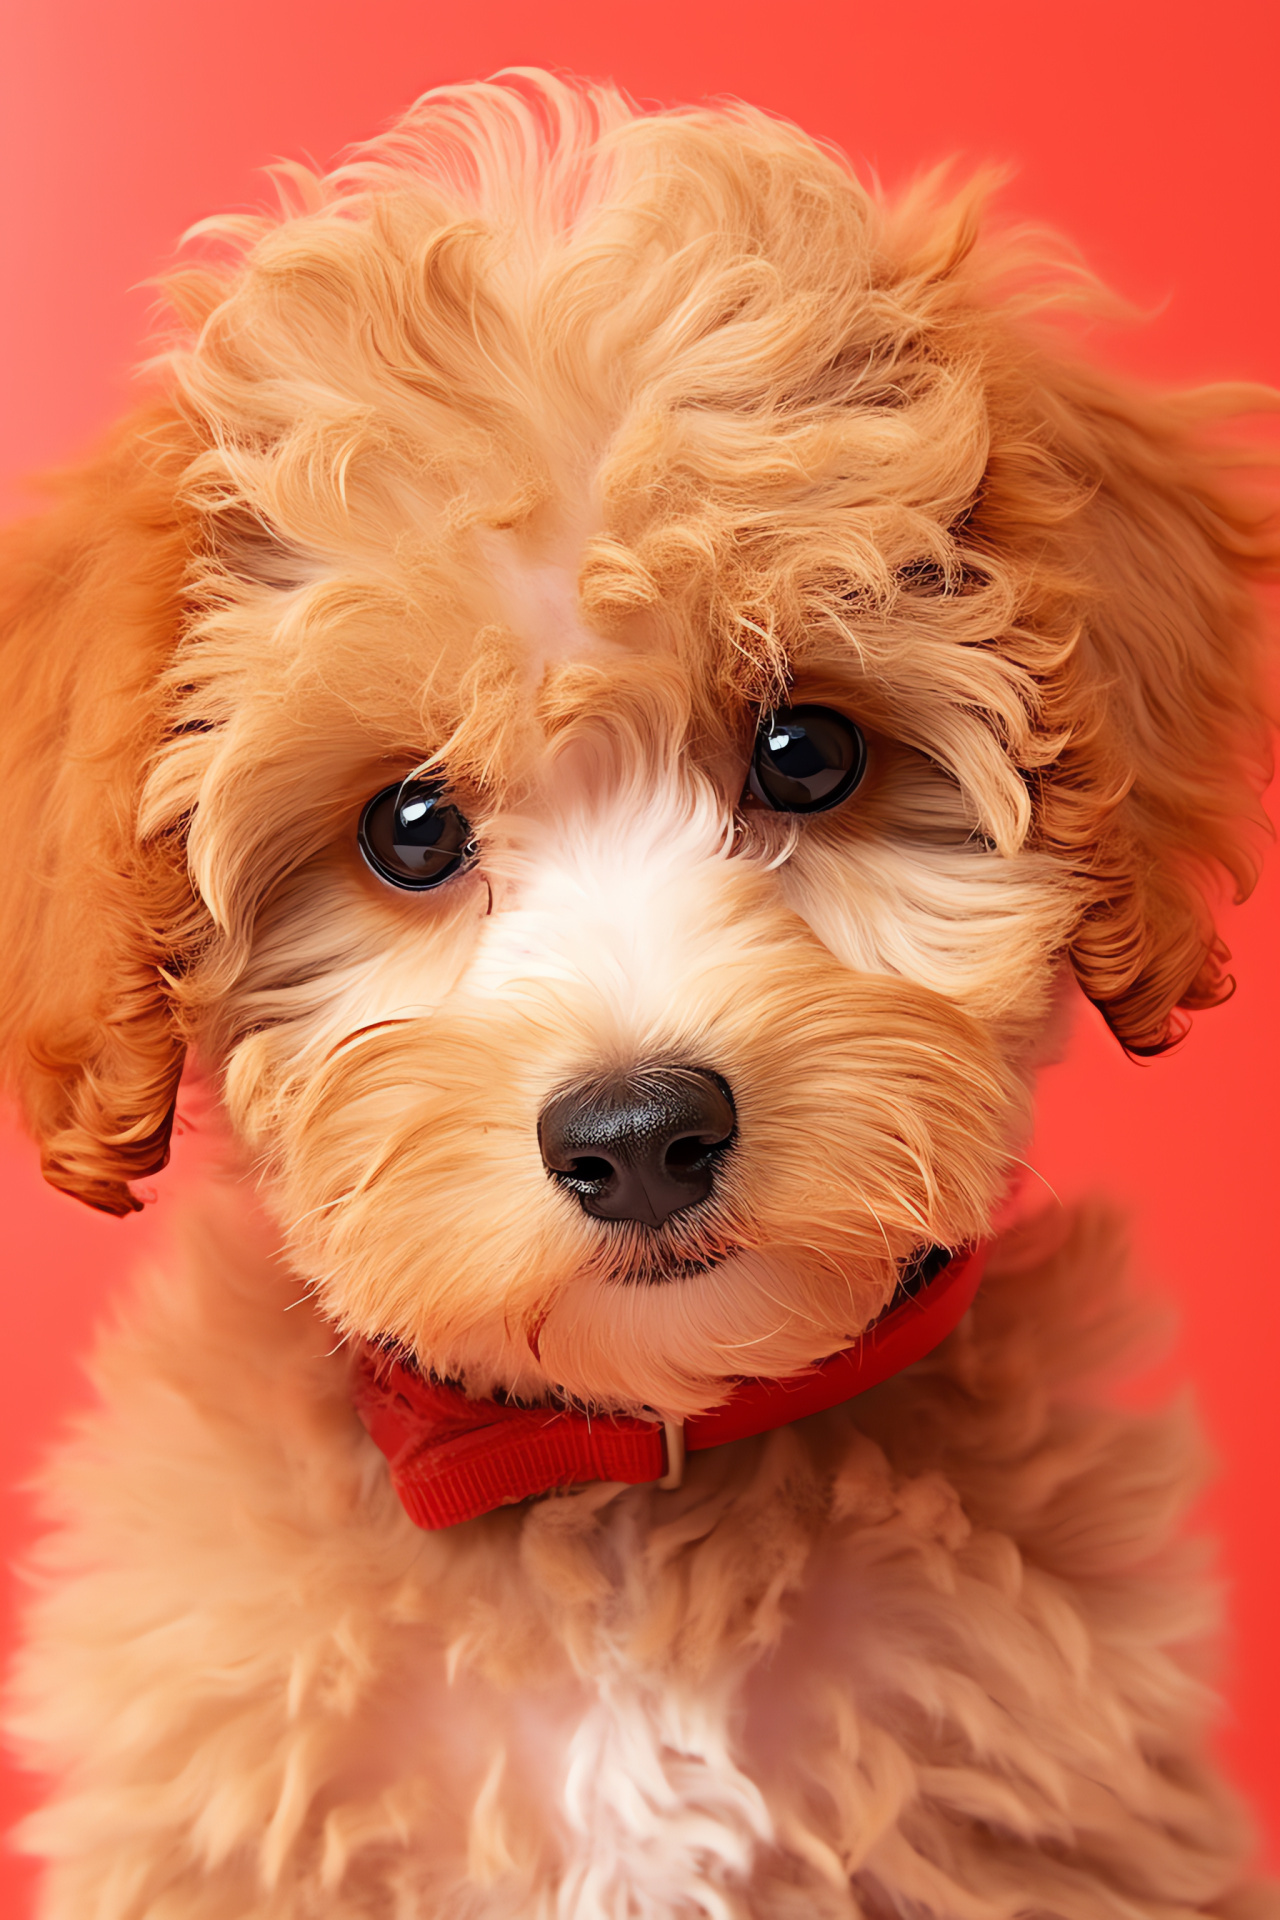 French breed, Curly-haired poodle, Fluffy dog texture, Red monochrome background, Canine close-up, HD Phone Wallpaper